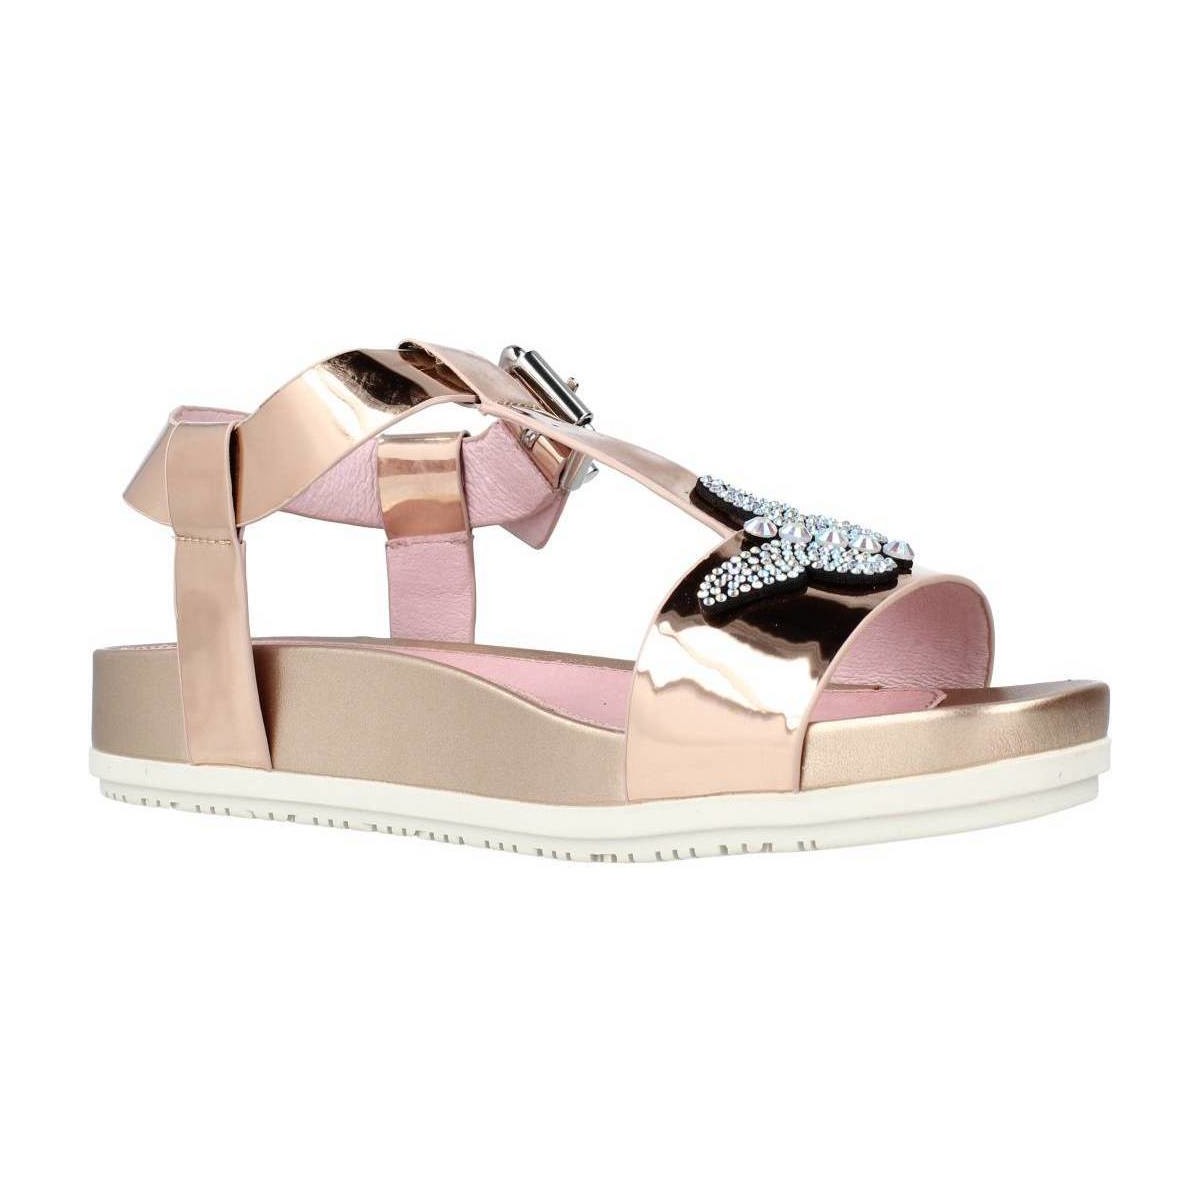 Chaussures Femme Sandales et Nu-pieds Stonefly STEP 6 MIRROR Rose